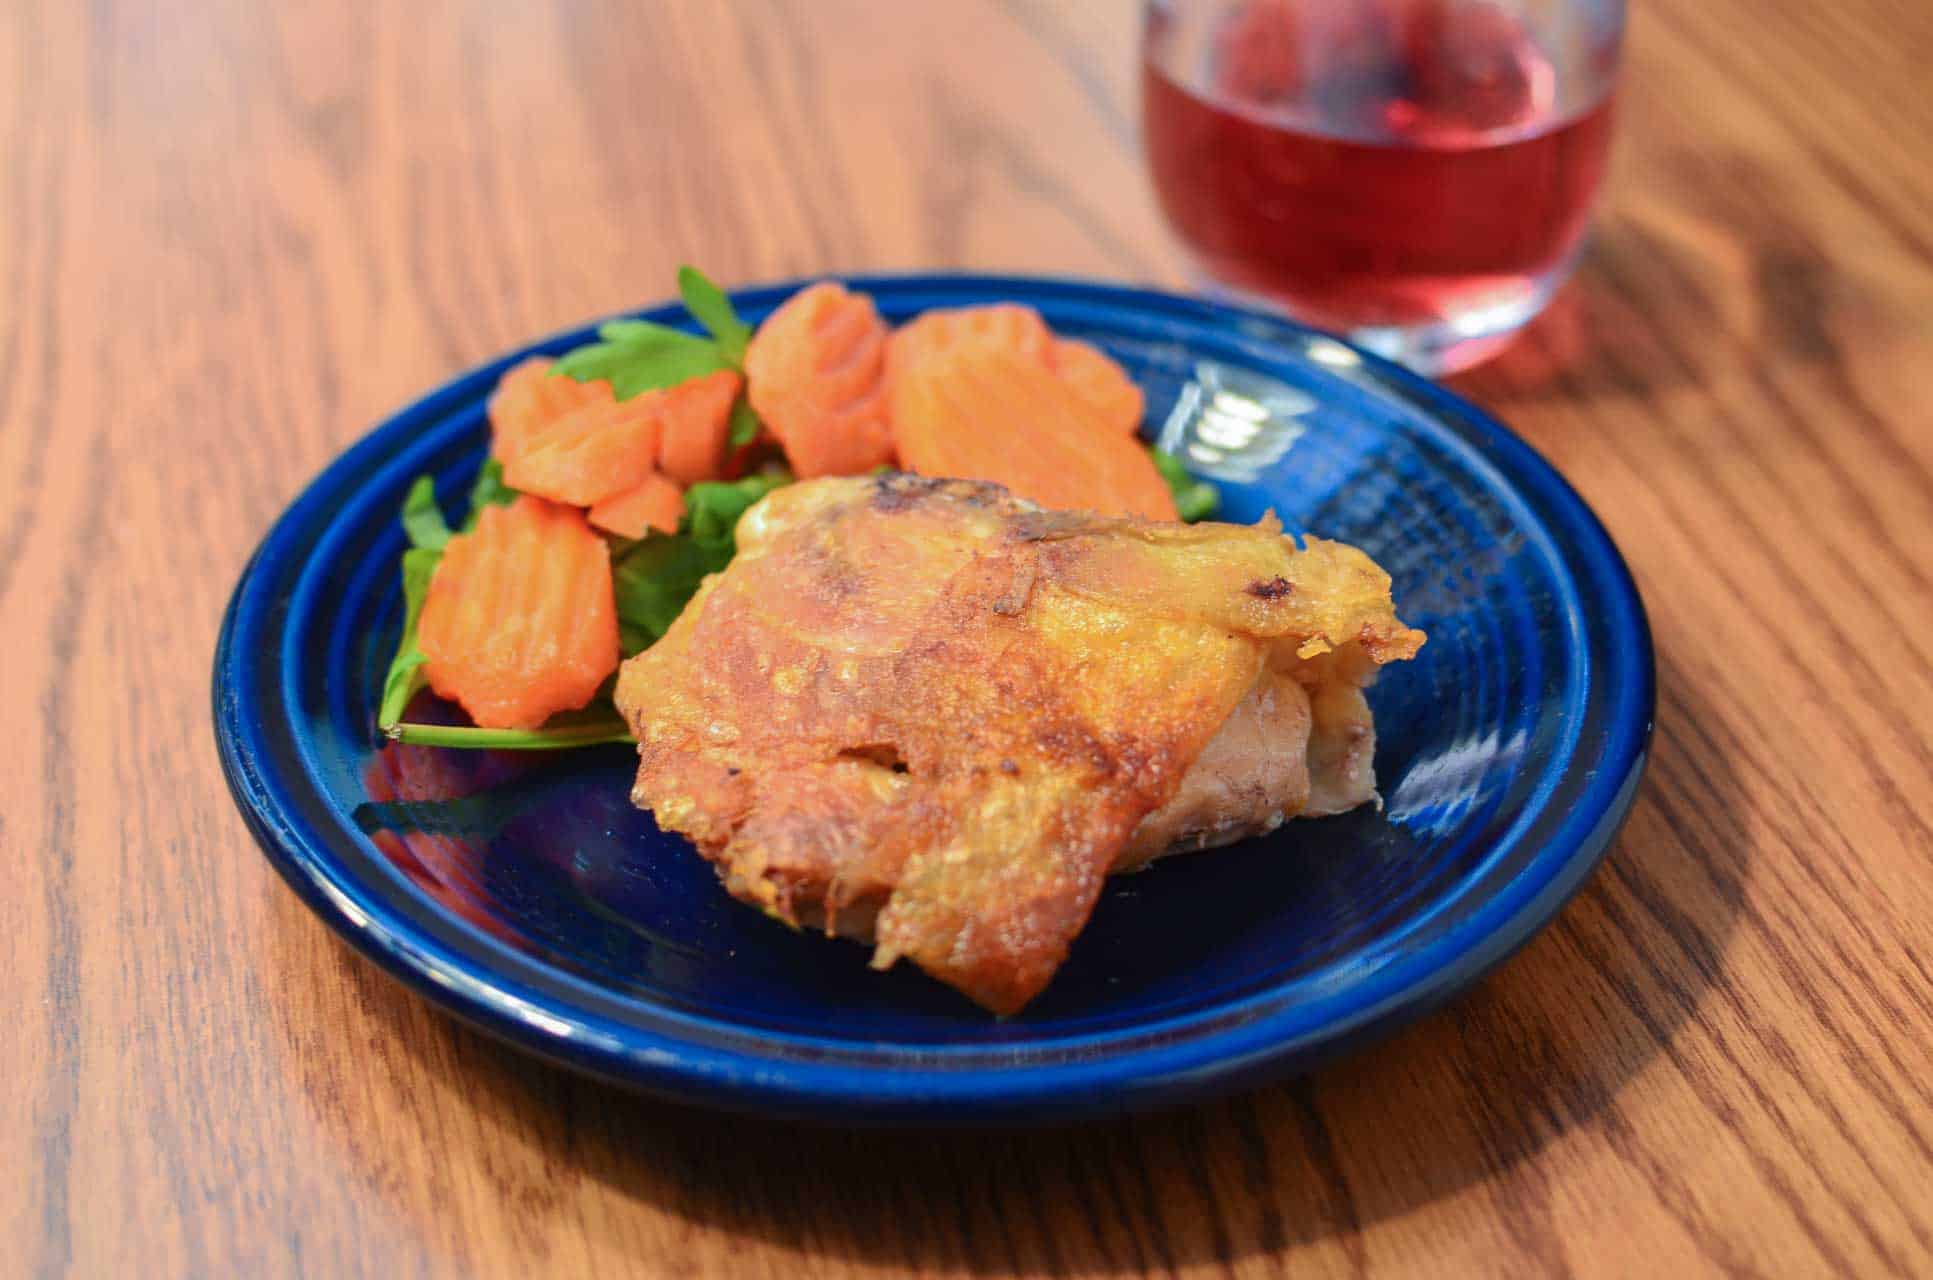 Cooked chicken thighs on a plate with vegetables, with a glass of wine.